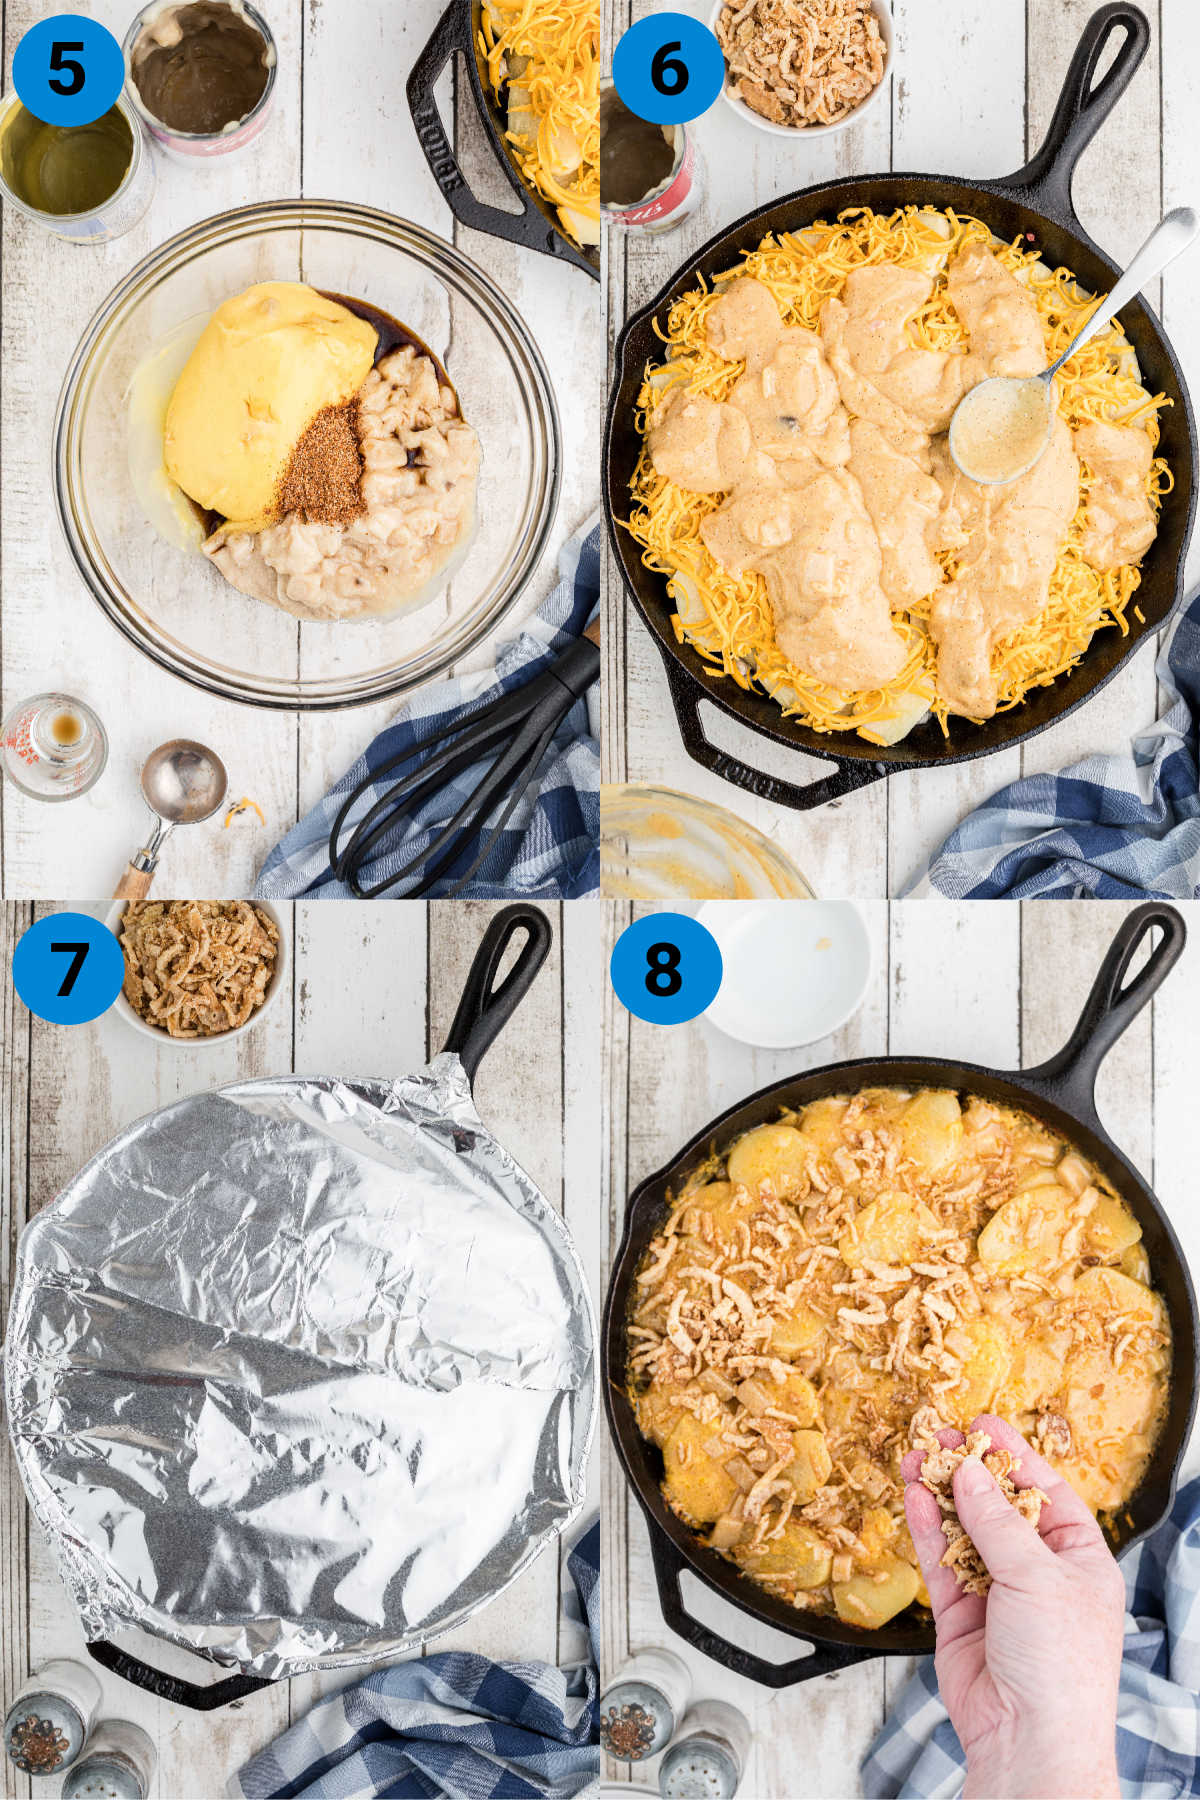 Collage of four images showing how to make a hobo casserole, steps 5 through 8